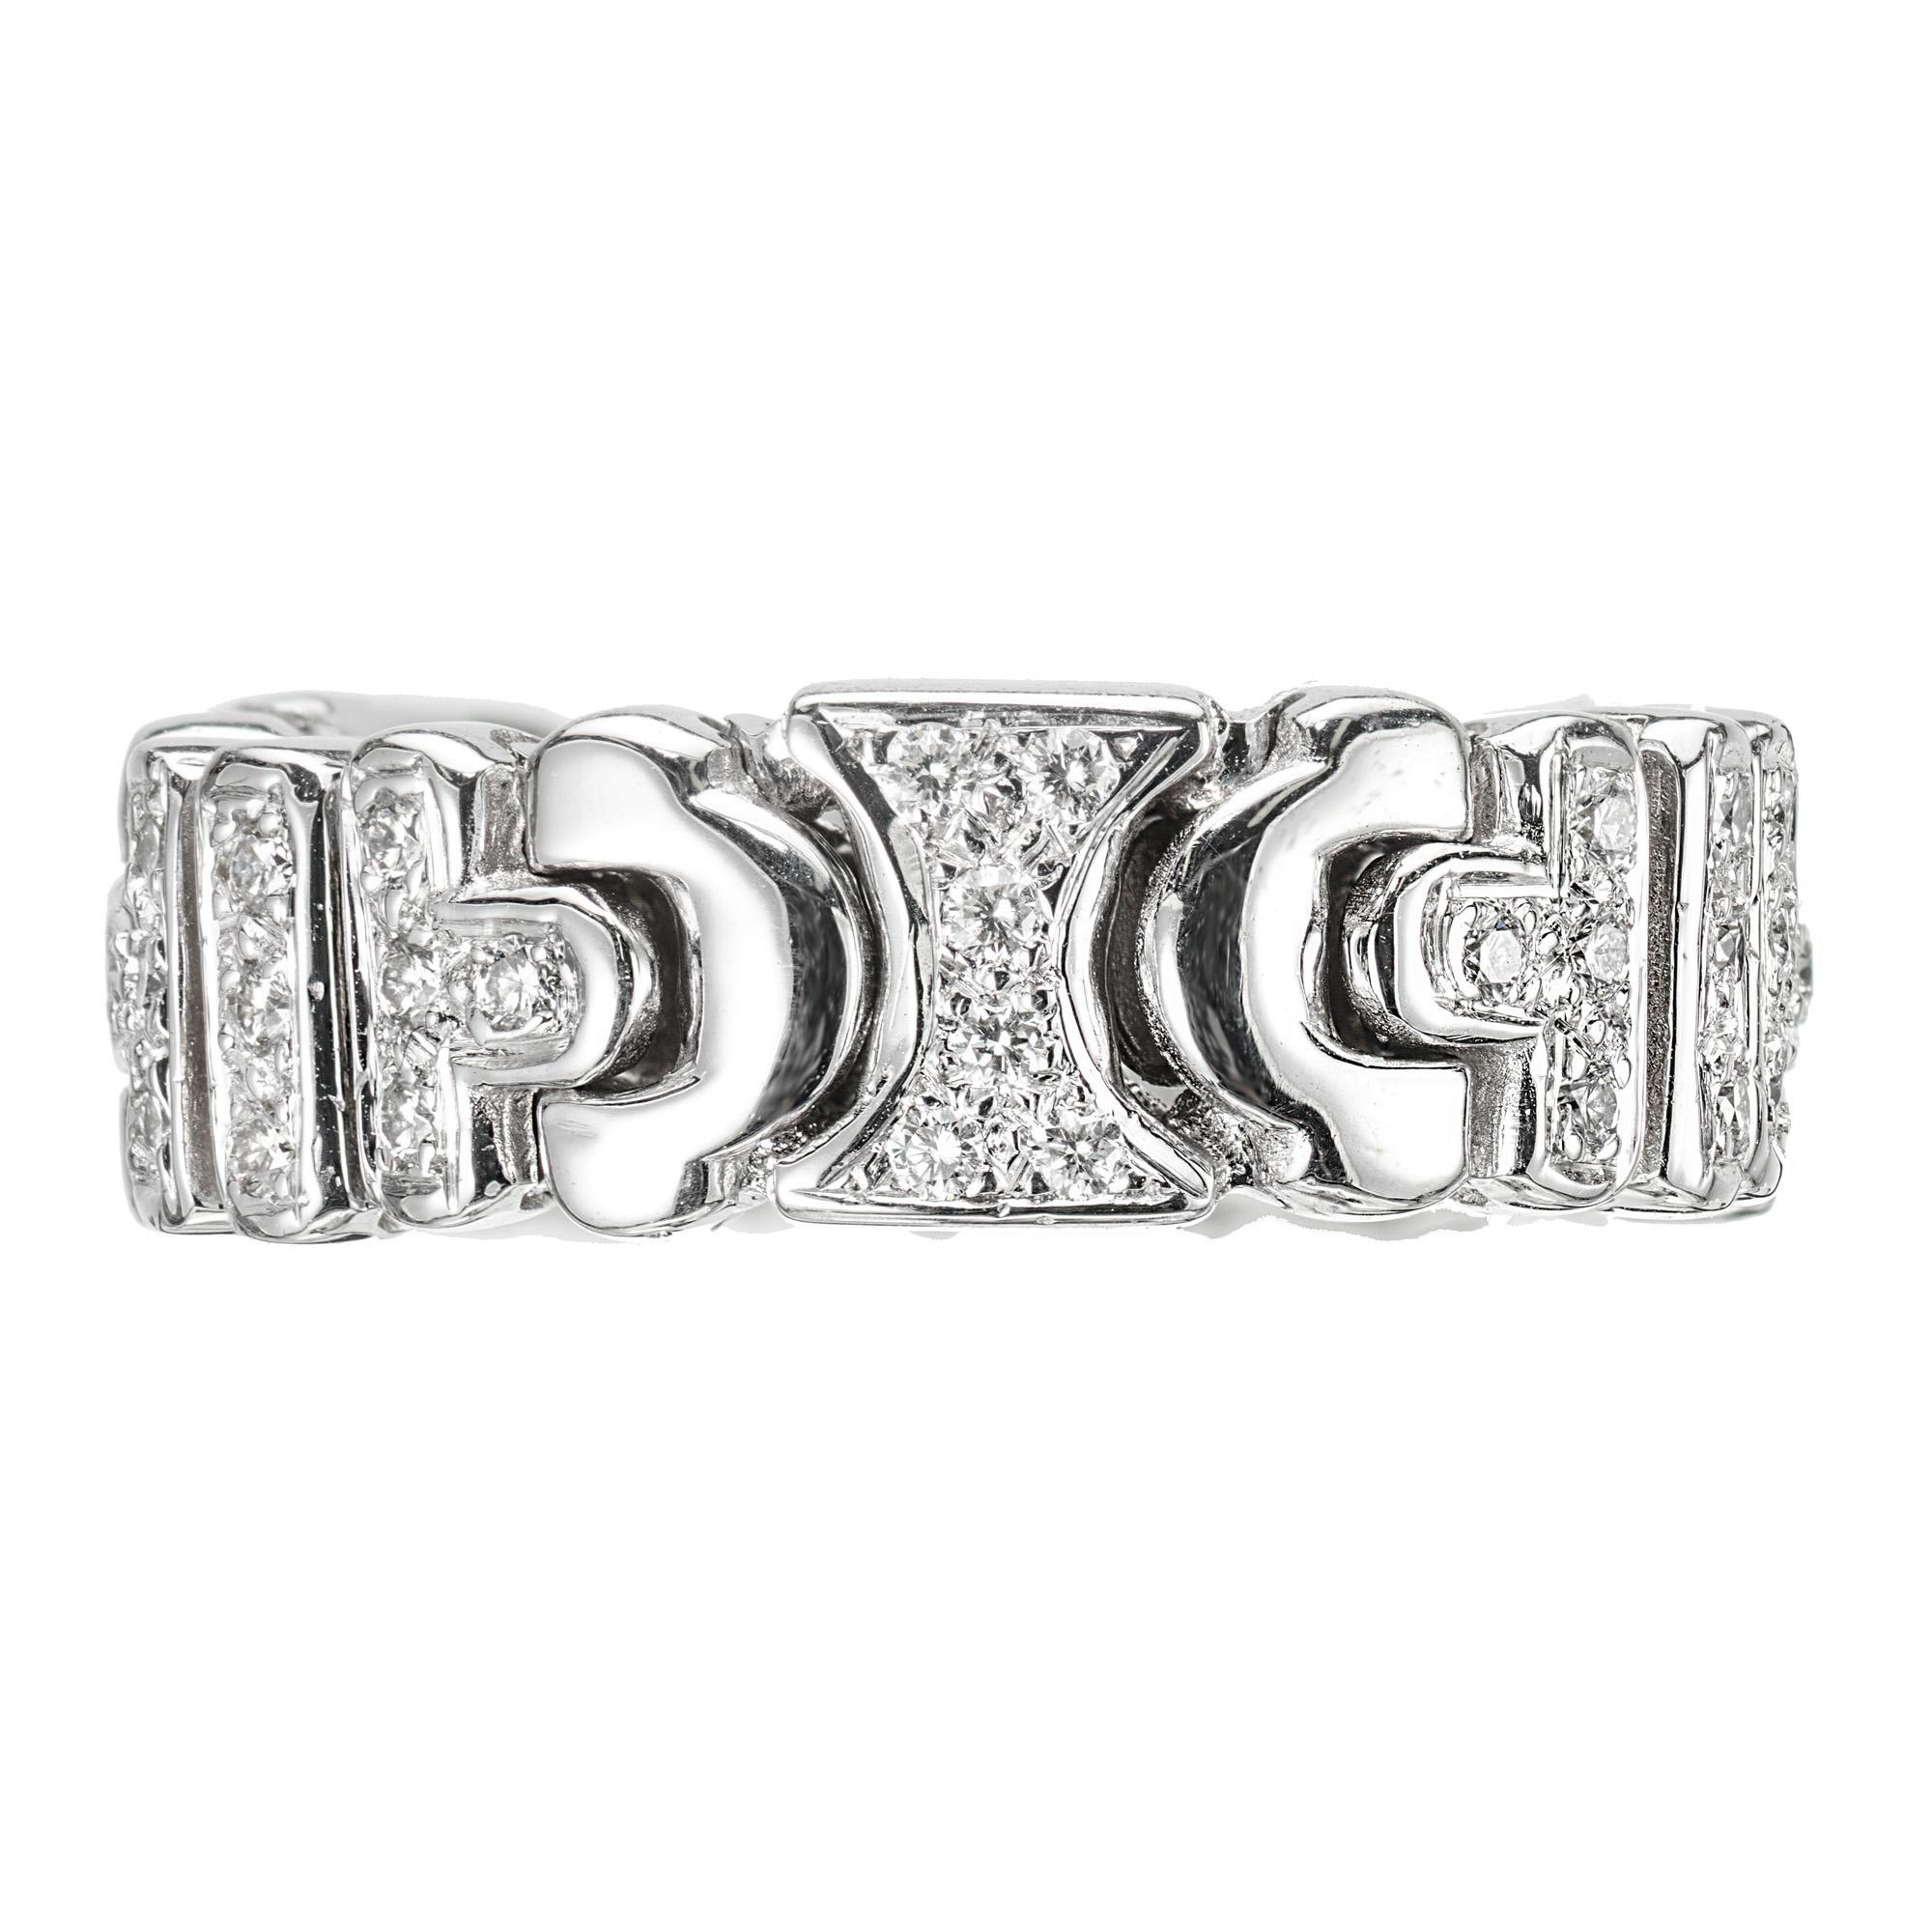 7mm wide flexible pave diamond eternity band. Set with 51 round cut diamonds in an 18k white gold band. Size 6.25 and not sizable. 

51 round diamonds, I-J VS approx. .75cts
Size 6.25 and not sizable
18k white gold 
Stamped: 18k
10.6 grams
Width at